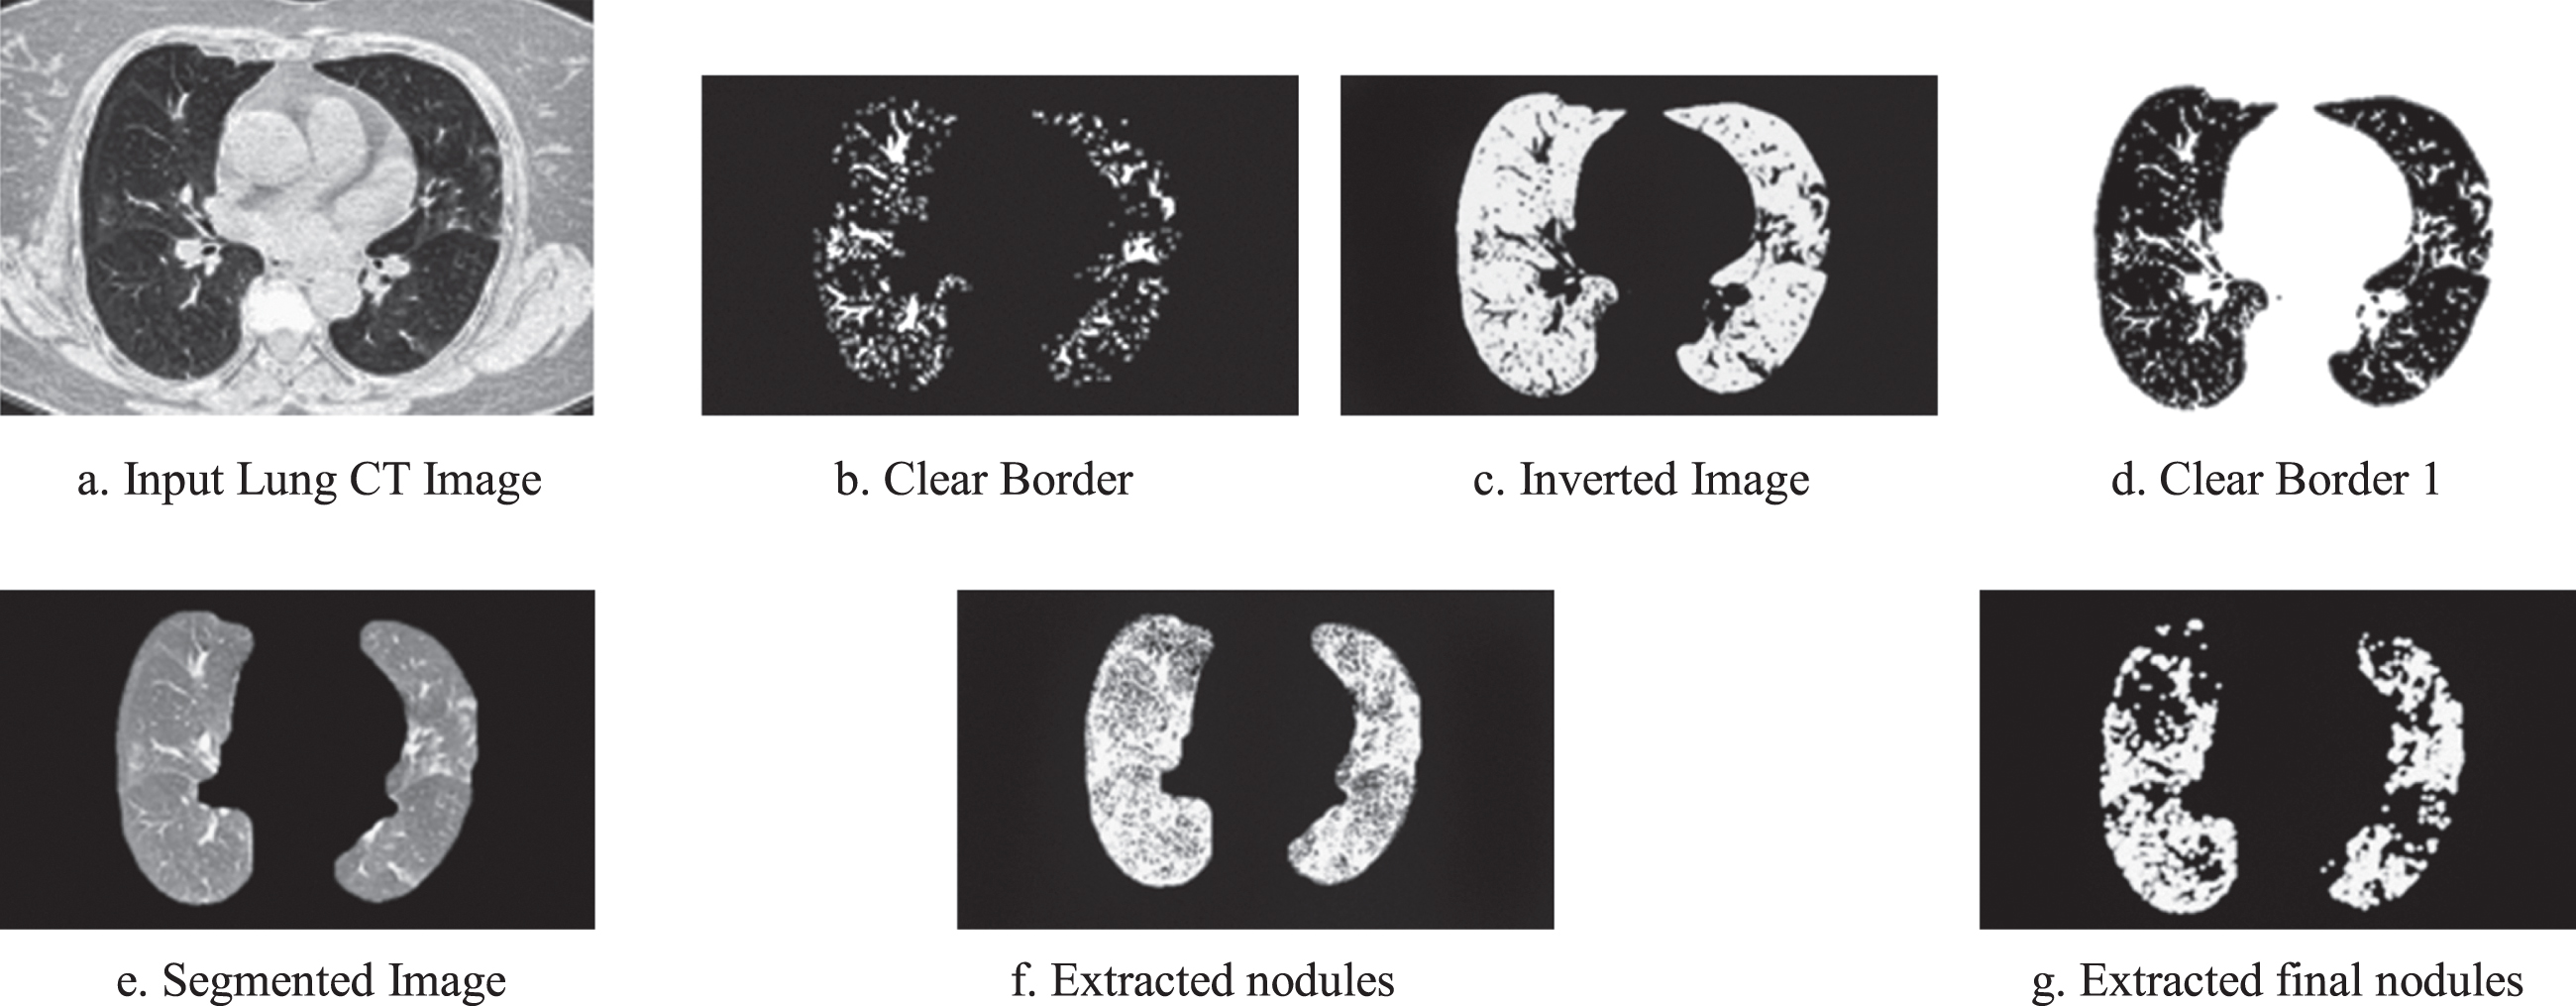 a–2 g. Experimental images obtained for Pulmonary Edema.